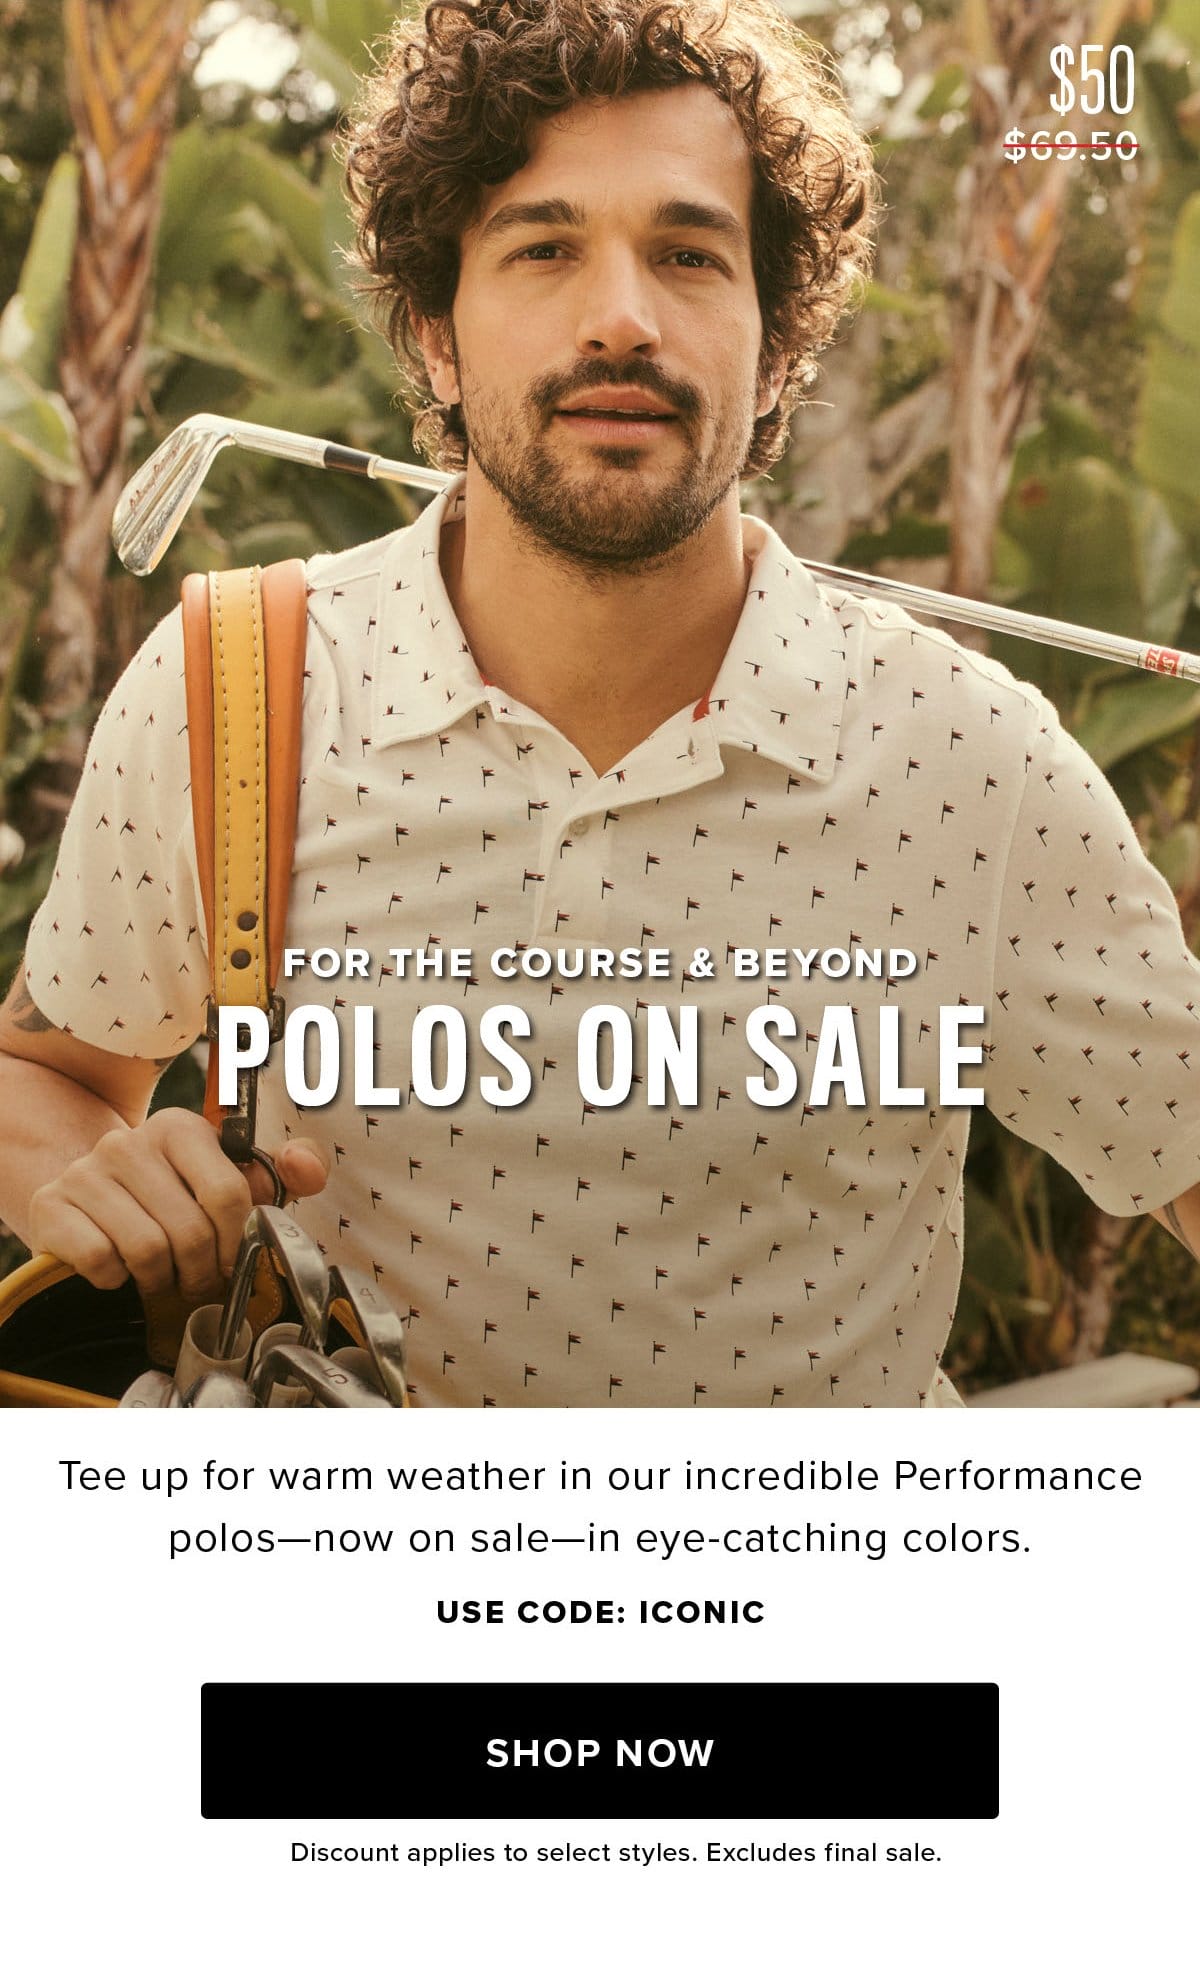 For The Course & Beyond: Polos On Sale